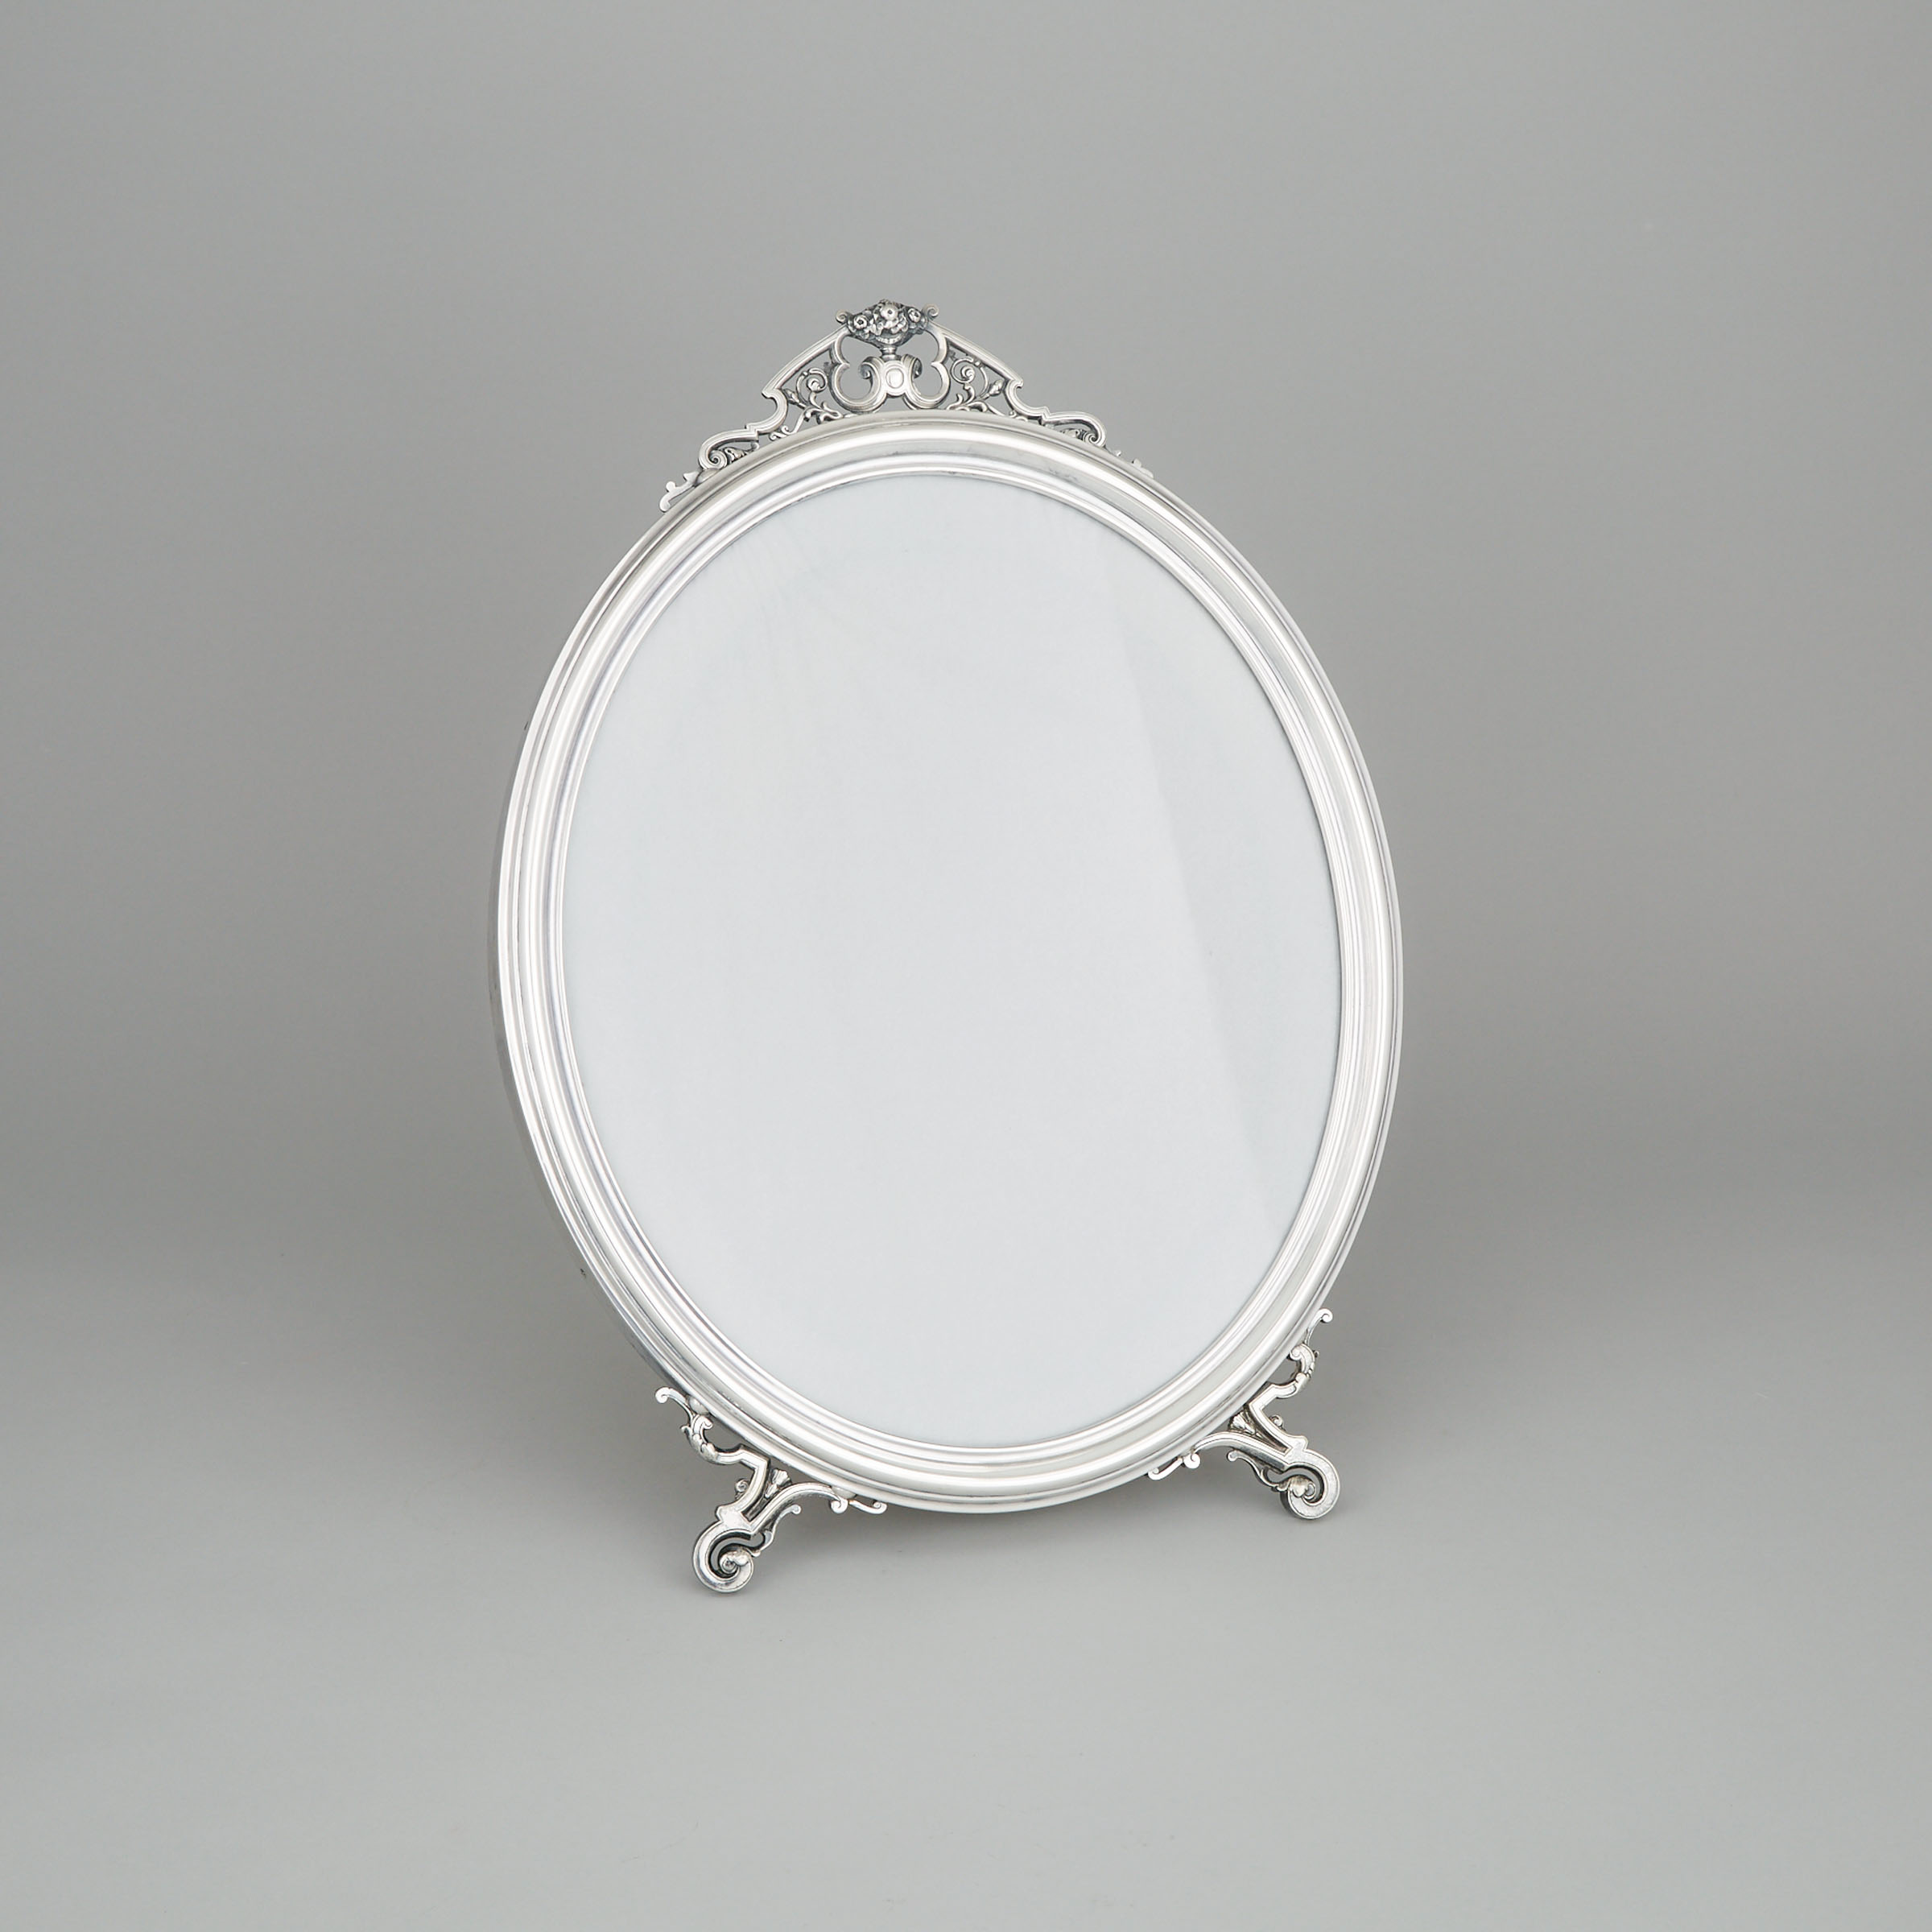 Austrian Silver Plated Oval Strut Mirror or Large Photograph Frame, Krupp, Berndorf, early 20th century